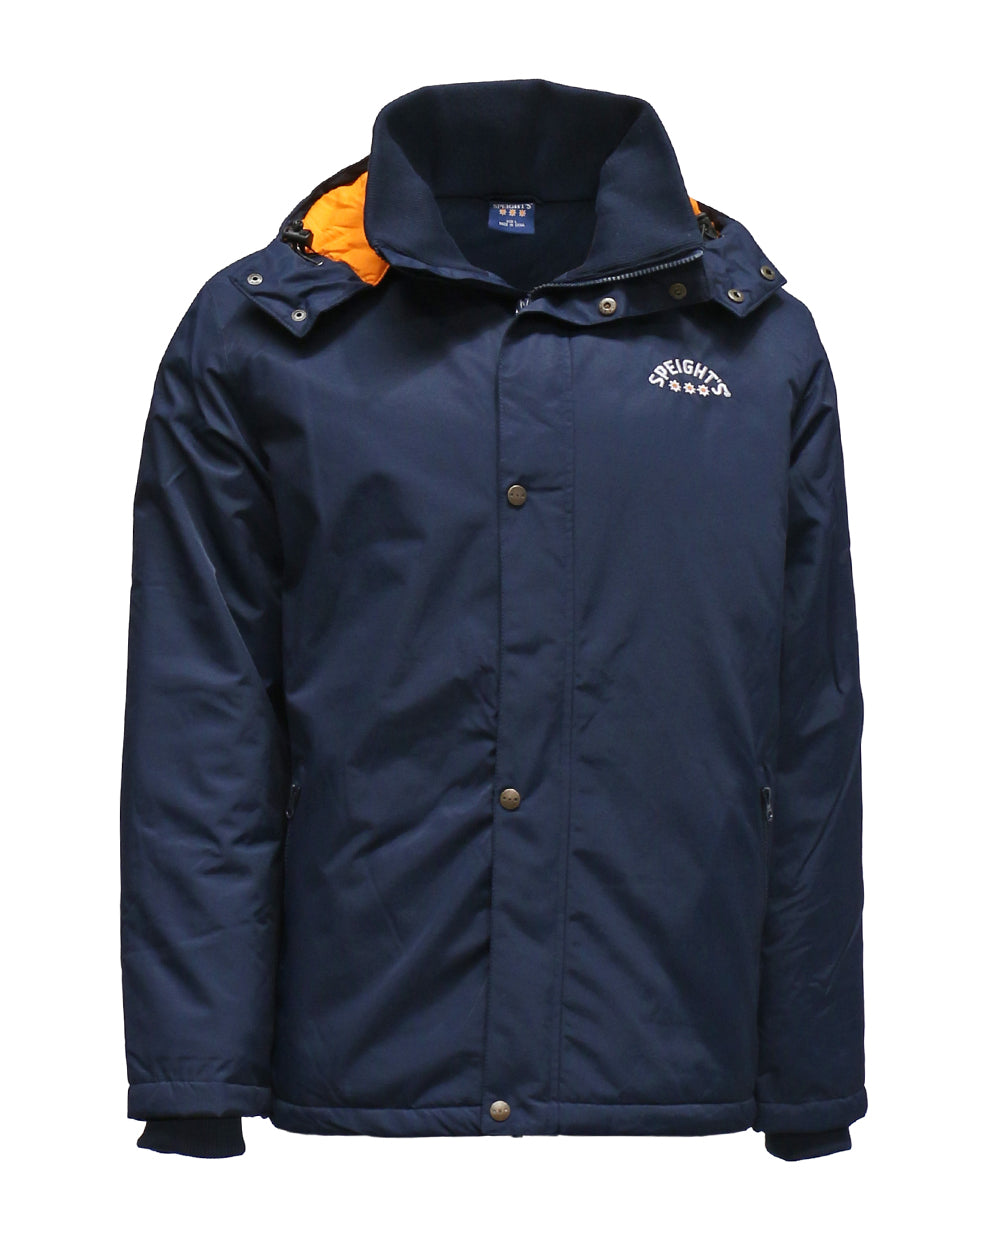 Speight's Winter Jacket -  Beer Gear Apparel & Merchandise - Speights - Lion Red - VB - Tokyo Dy merch